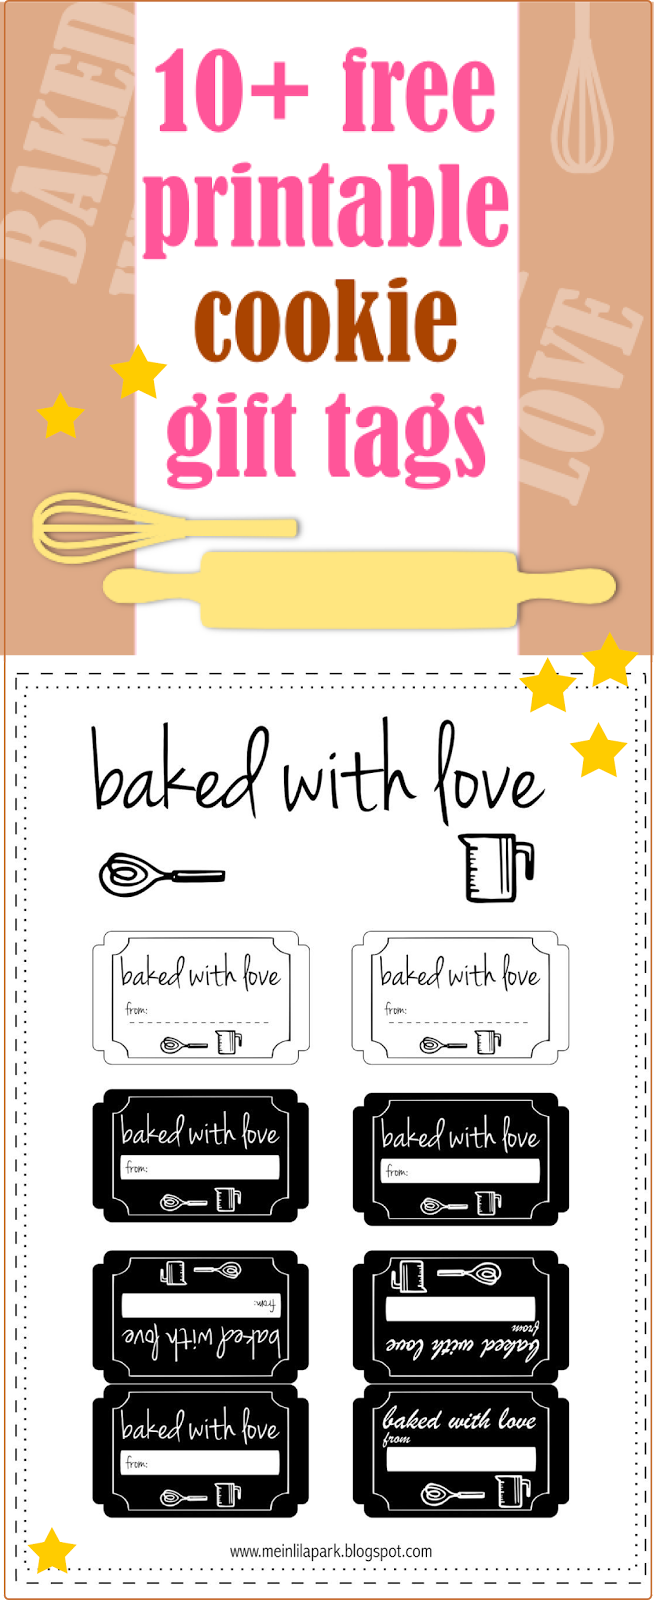 Free Printable Cookie Gift Tags Round-Up